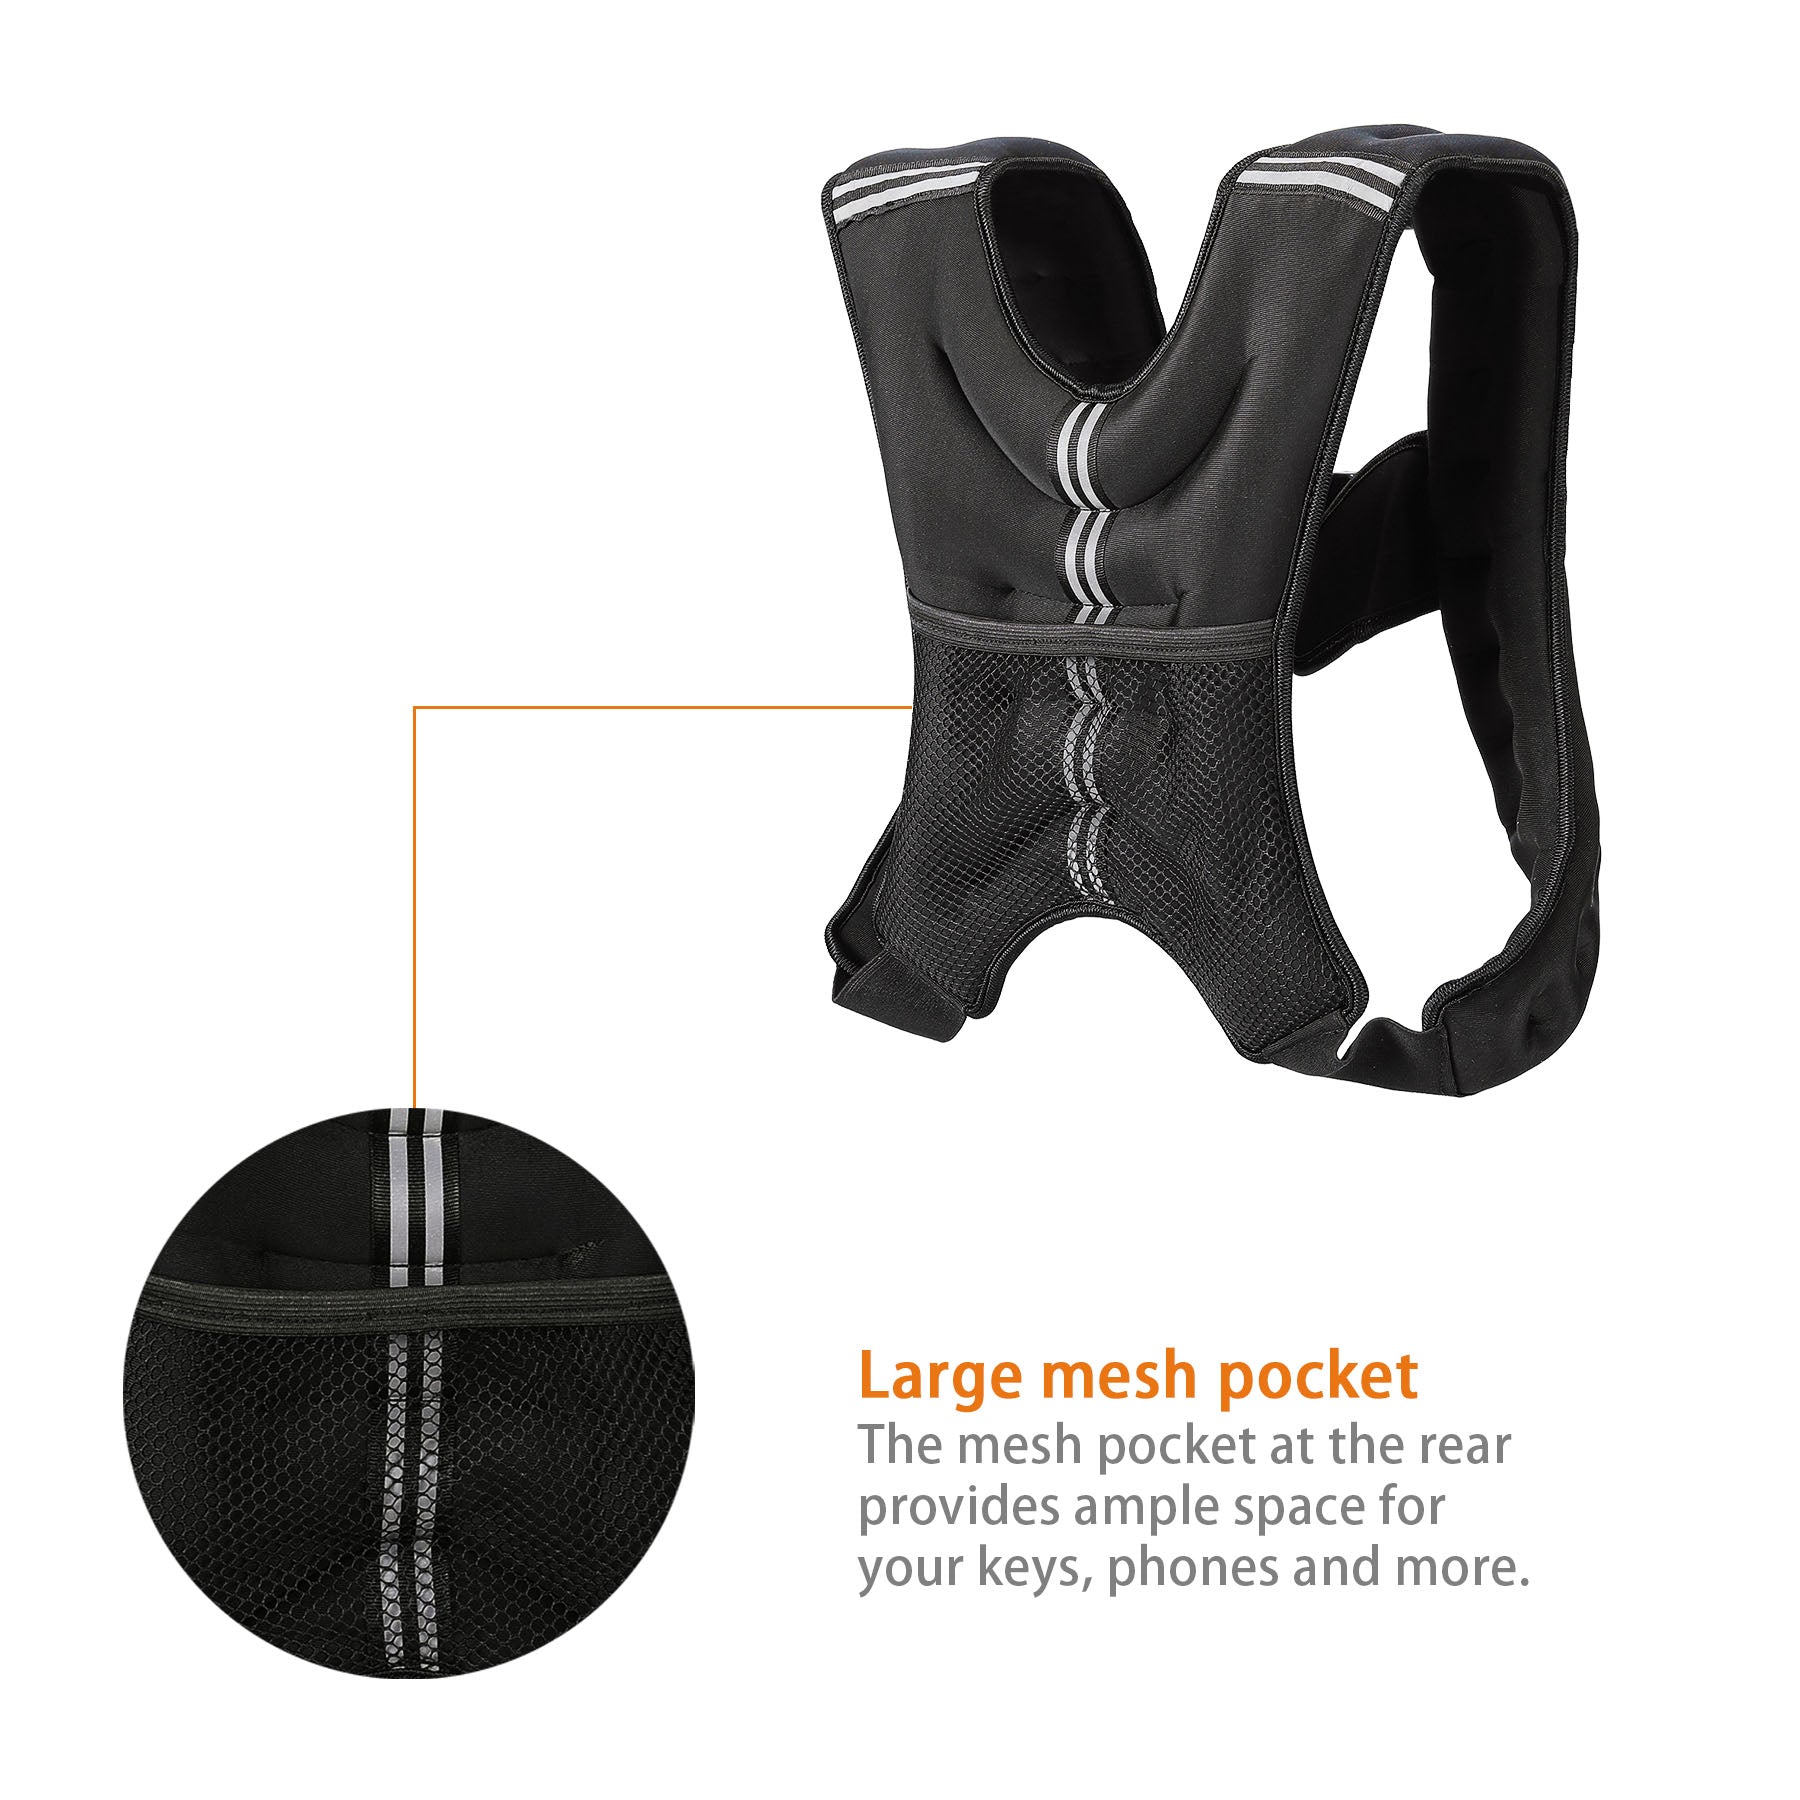 Weighted Vest Workout Equipment Body Weight Vest for Men and Women –  fitstarstore